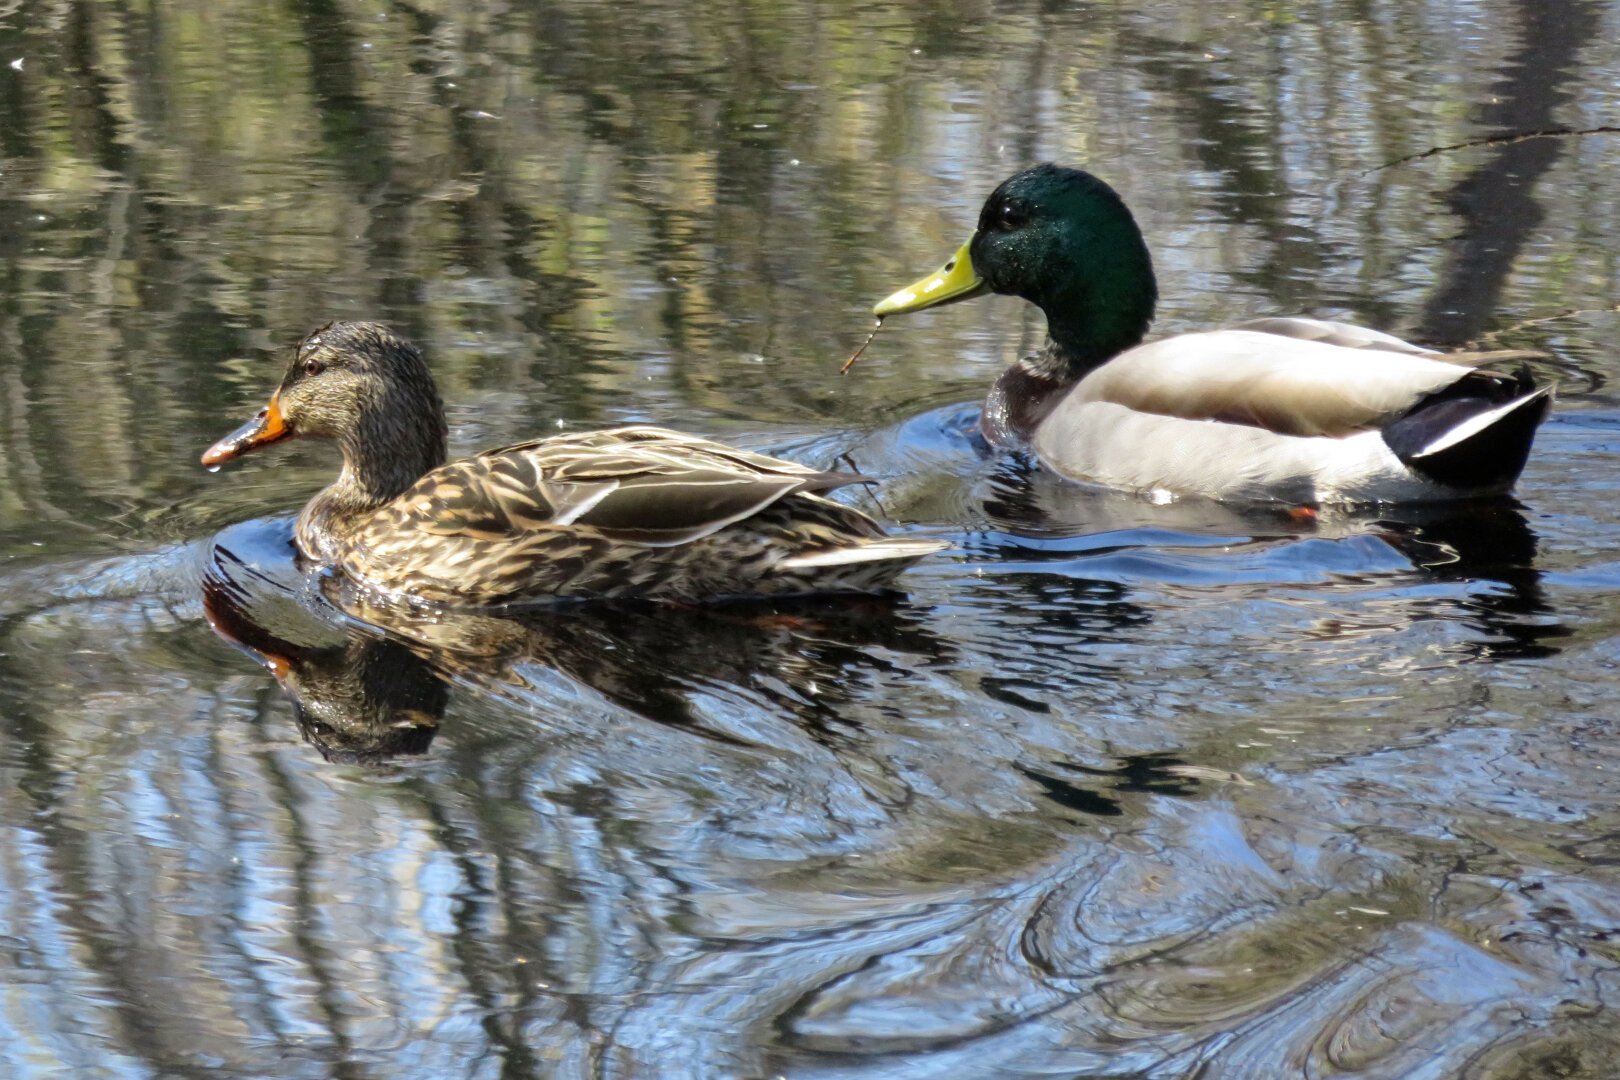 Two pairs of ducks and three geese seen at the marsh yesterday. (That almost sounds like a card hand with a weird deck.) #birds #nature #ducks #geese #mallards #canadageese